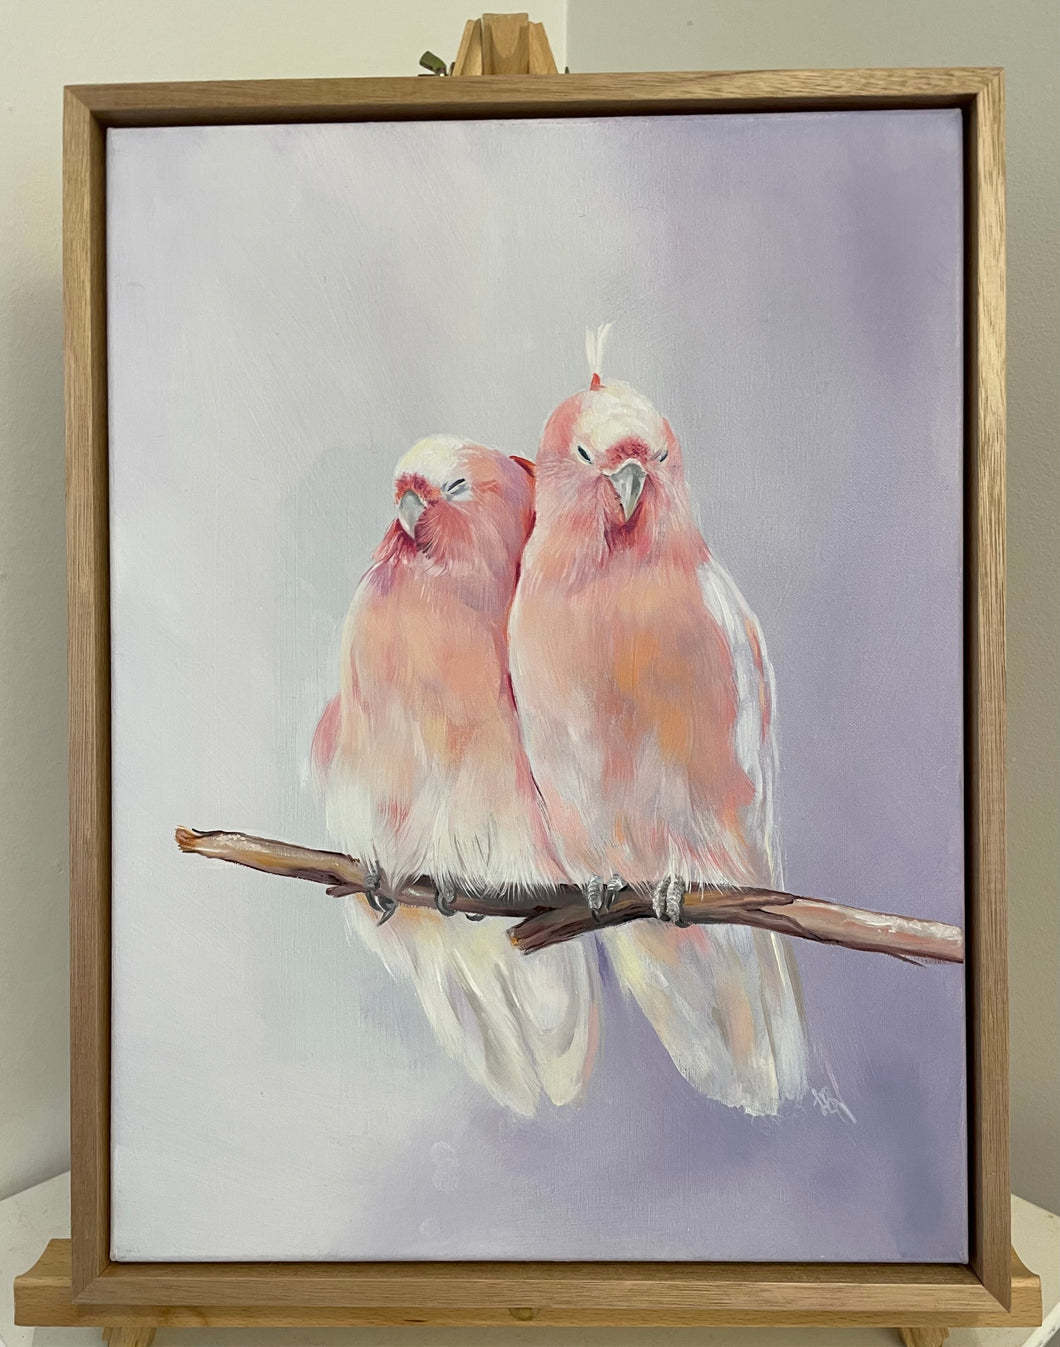 A Snuggle of Pink Cockatoos - Original Oil Painting ### SOLD ###